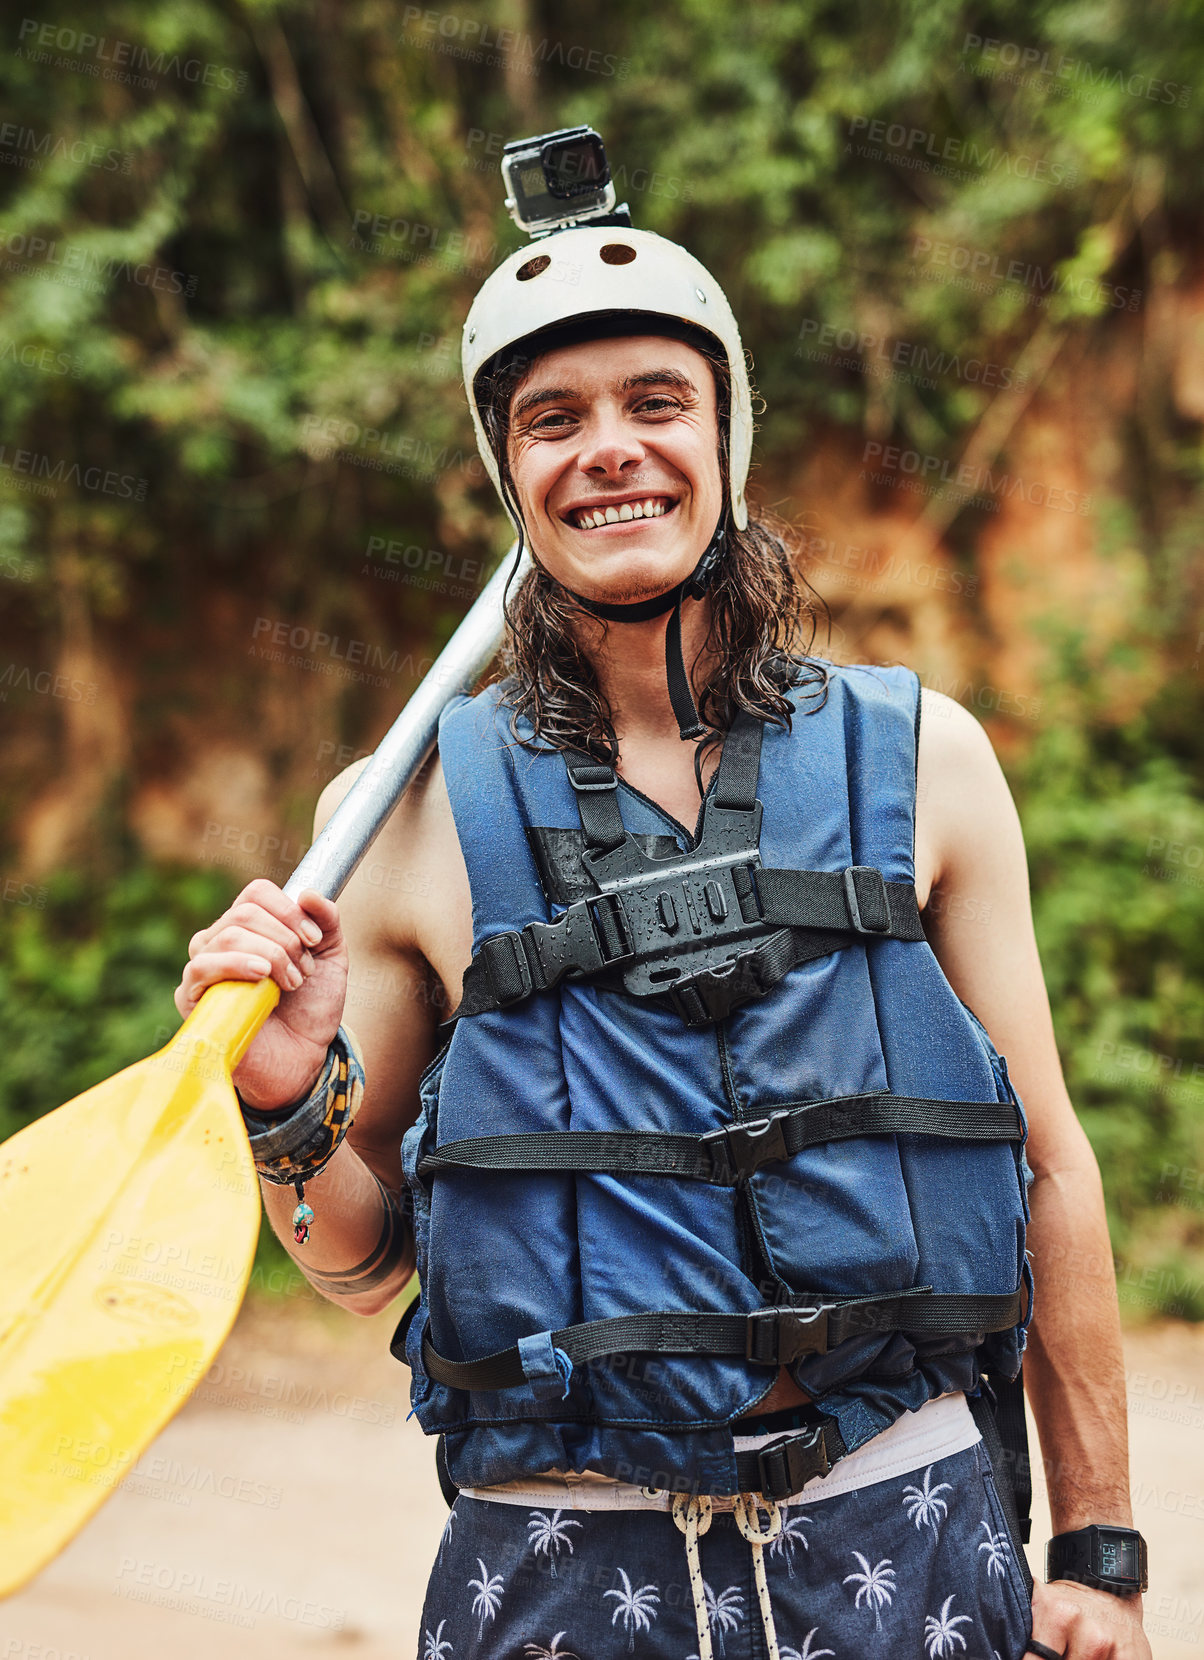 Buy stock photo Cropped shot of an adventurous young man wearing a helmet with a action camera attached